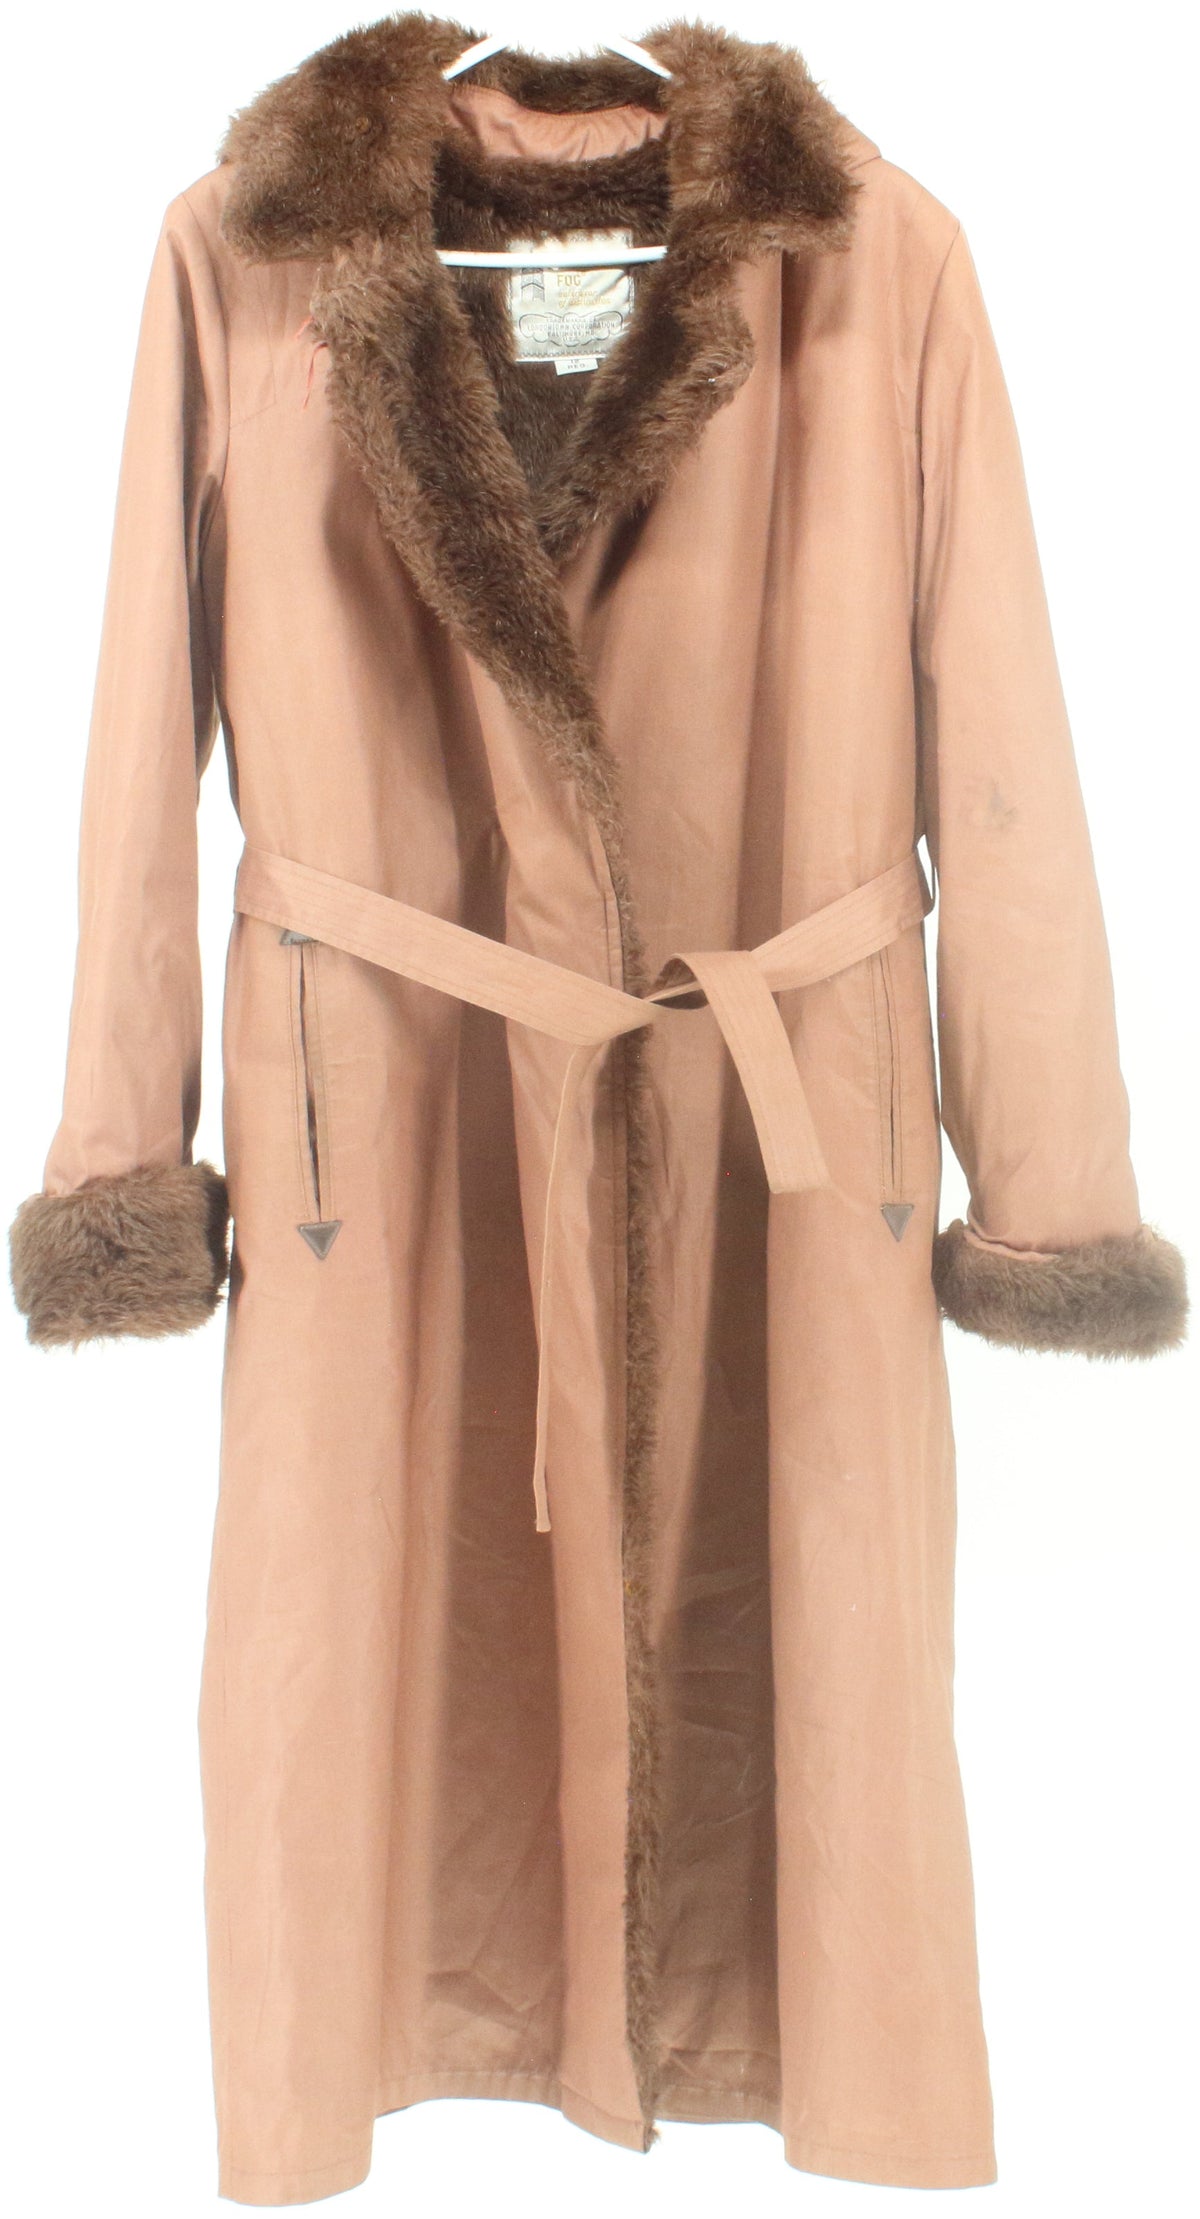 London Fog Brown Hooded Women's Coat With Fur Lining